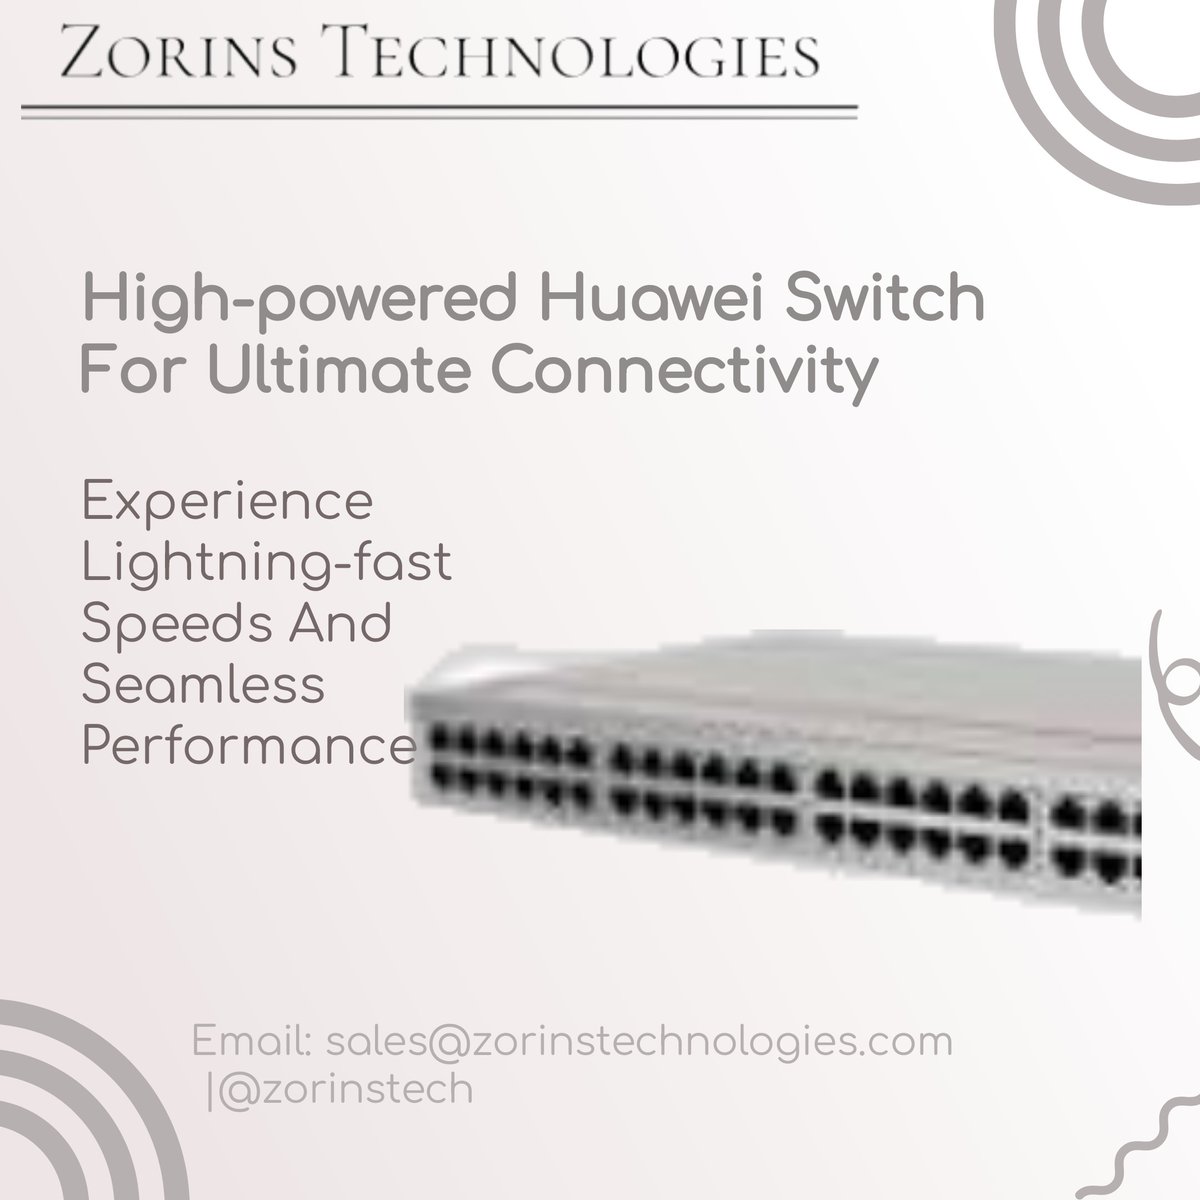 high-performance Huawai S310-48P4X switch, equipped with 48 10/100/1000BASE-T ports with 380W PoE+, 4 10GE SFP+ ports, and built-in AC power.  #networkequipment #cloudsystemsengineer #connectivity #networkmarketing #technology #networkcabling #systemintegration